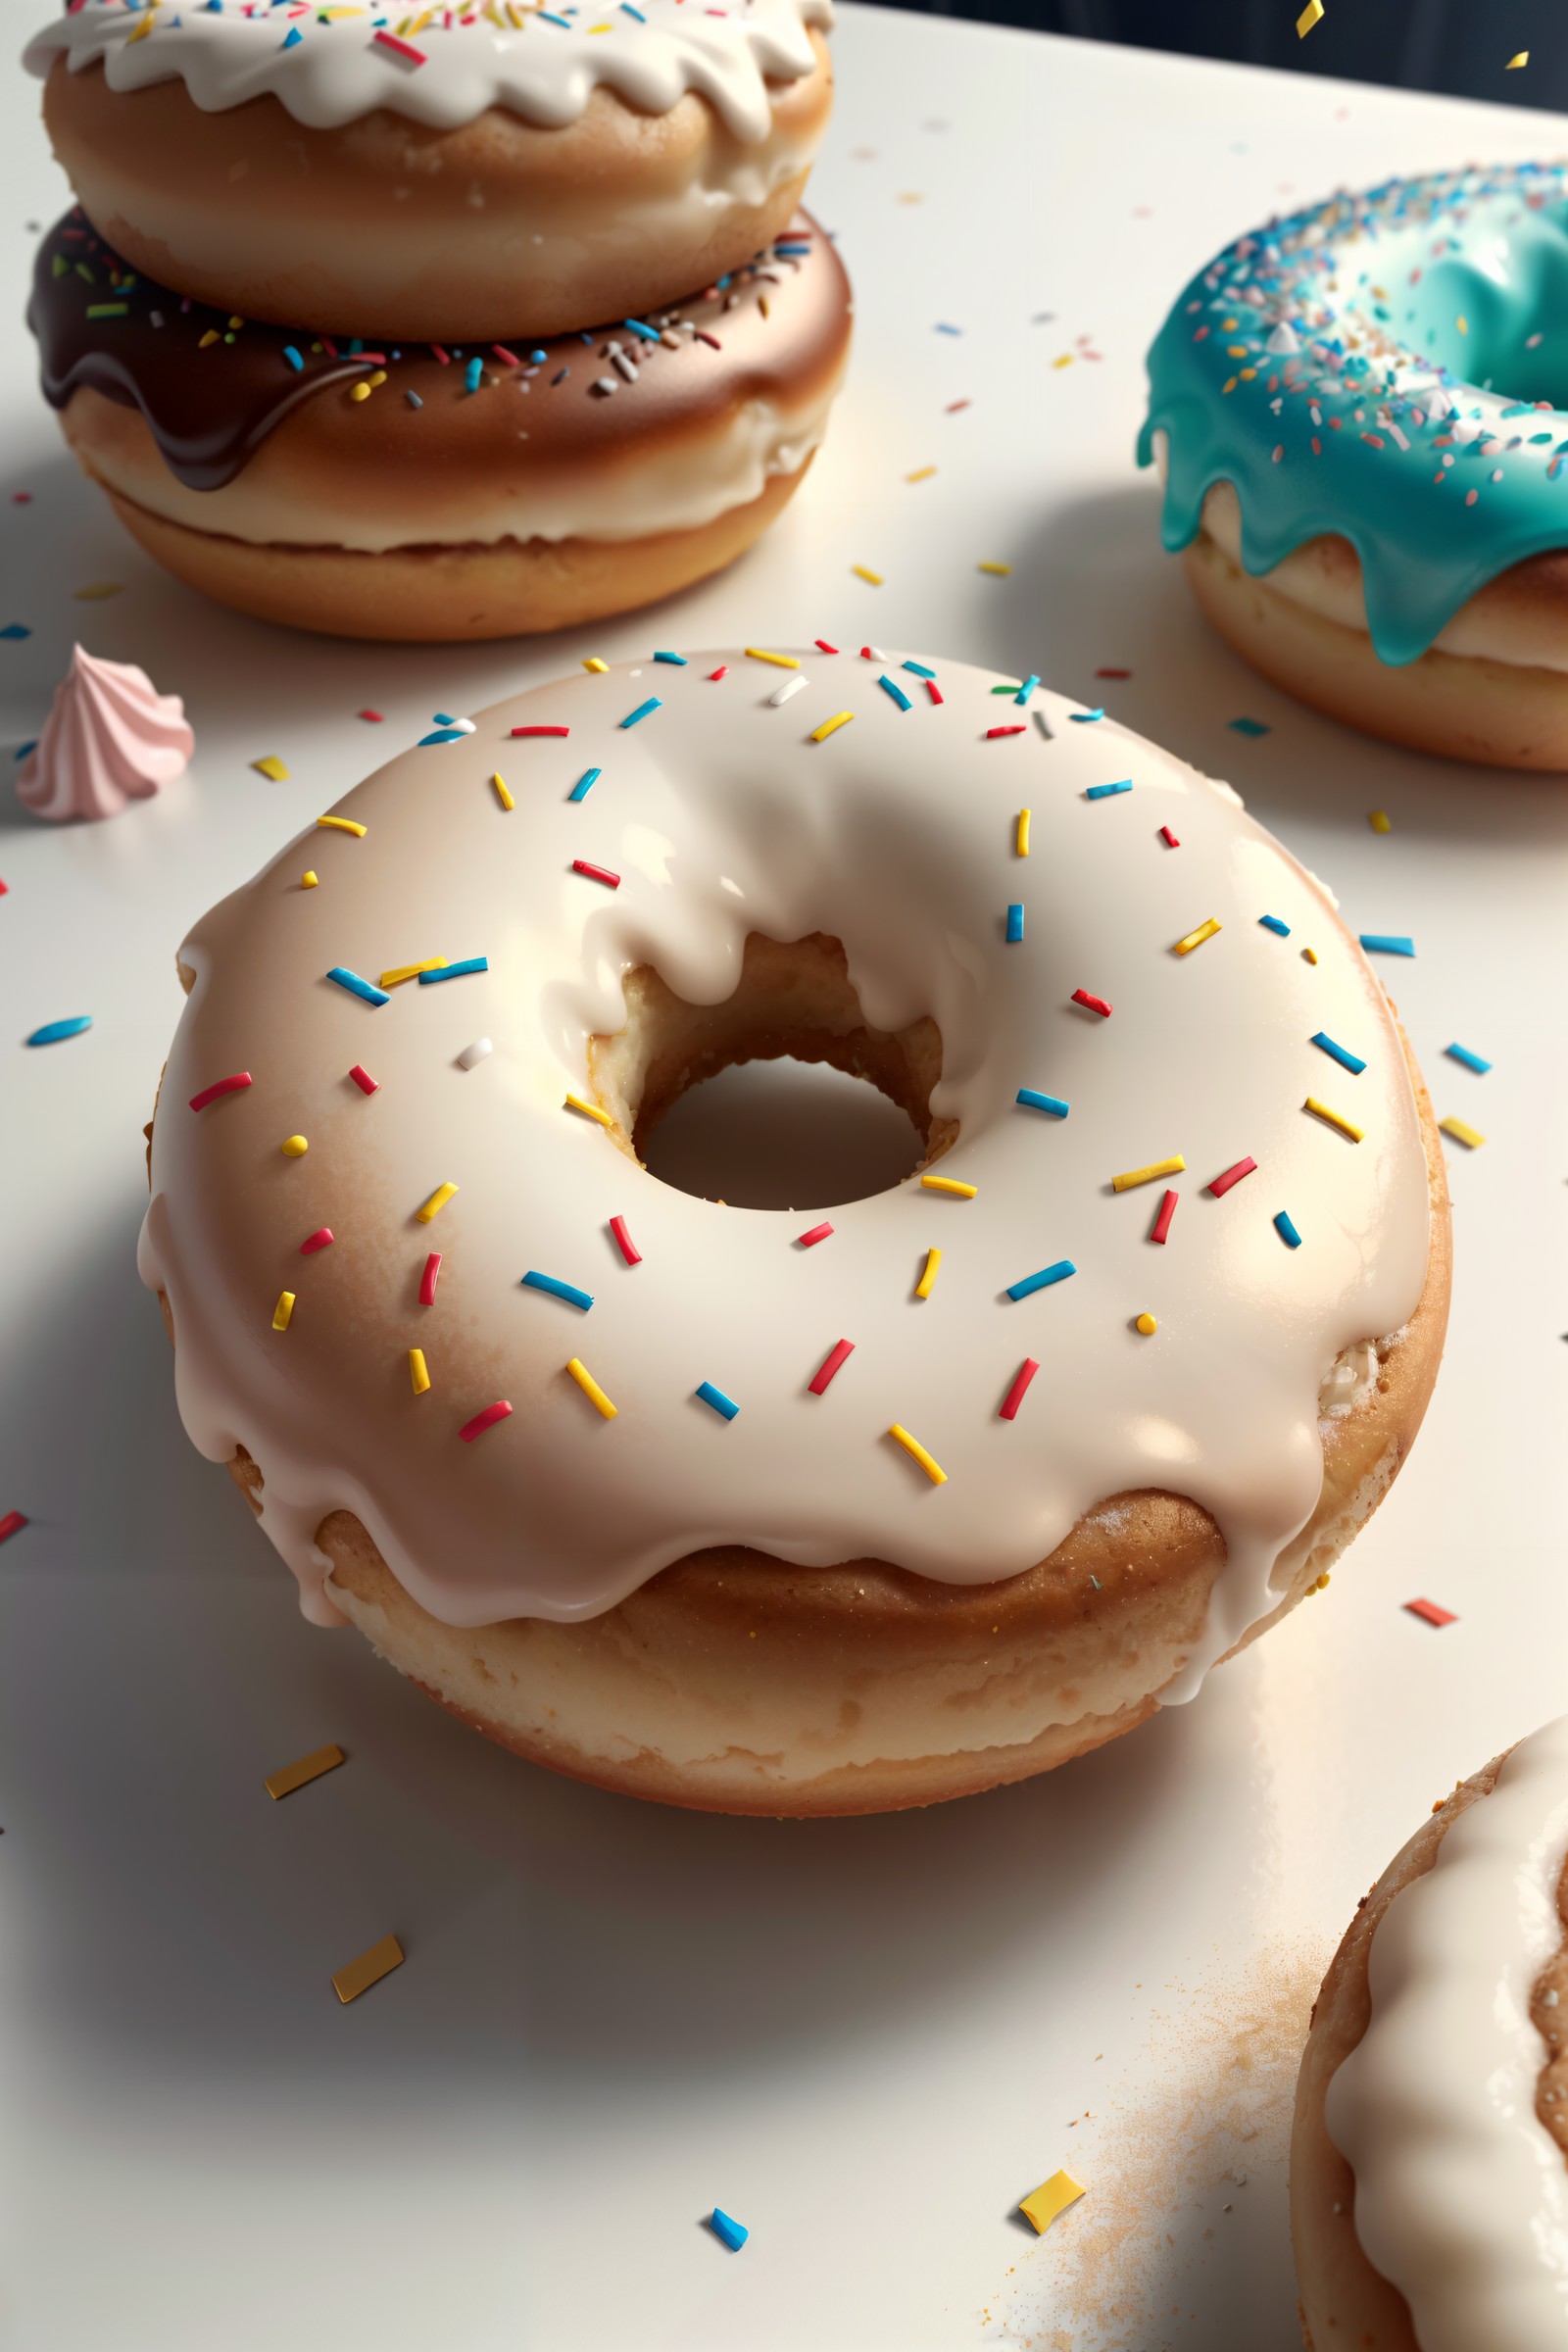 a frosted donut with sprinkles and confetti, blender donut tutorial, blender donut, sugar sprinkled, ultra realistic 3d il...